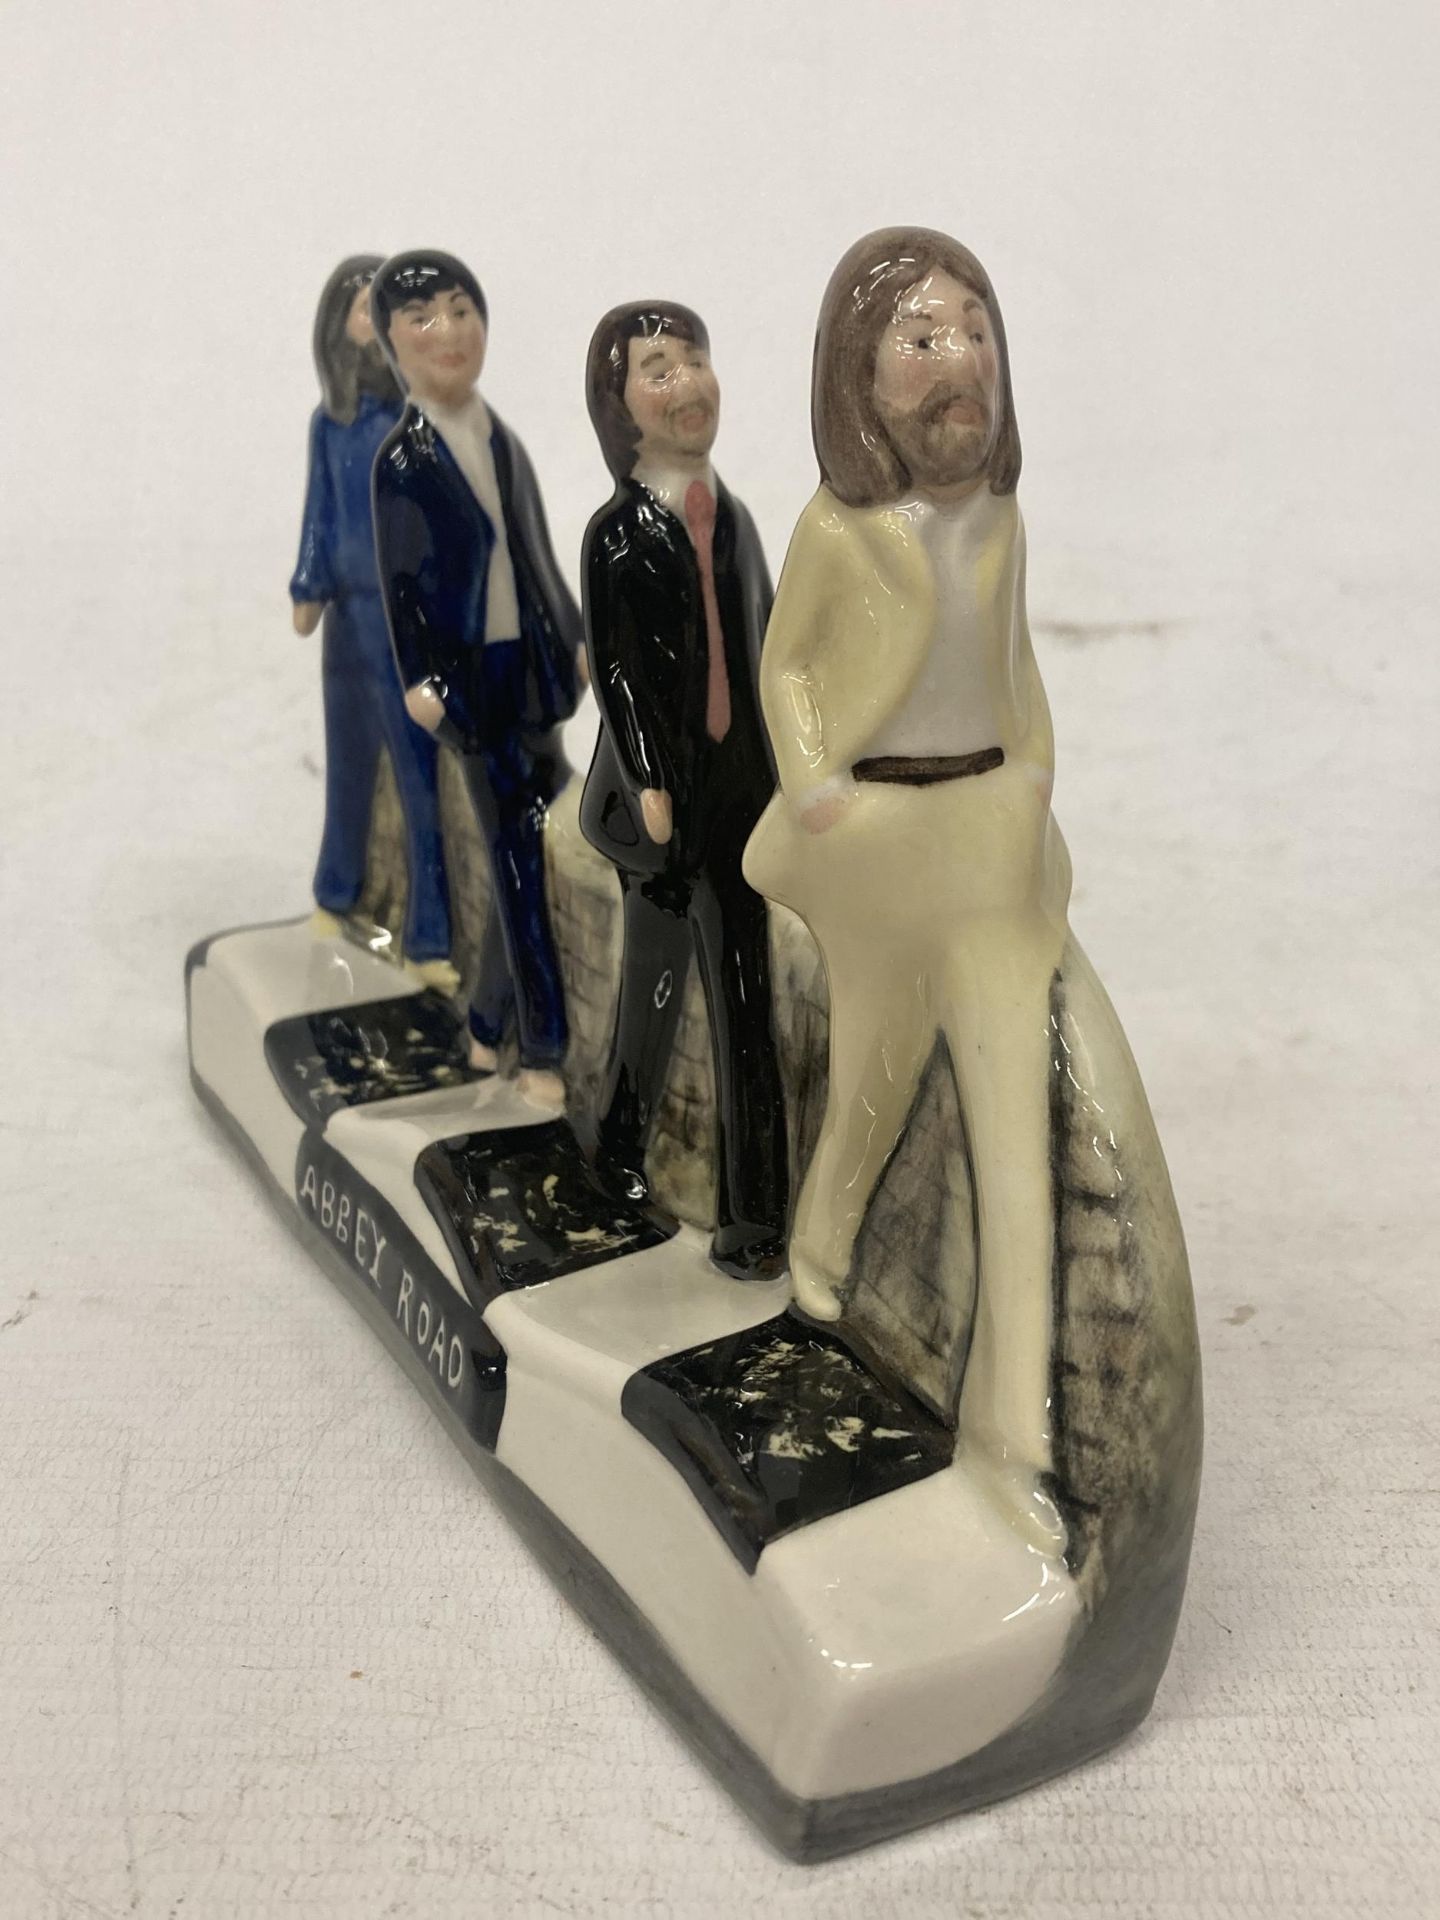 THE BEATLES ABBEY ROAD FIGURE - BAIRSTOW MANOR - Image 2 of 5